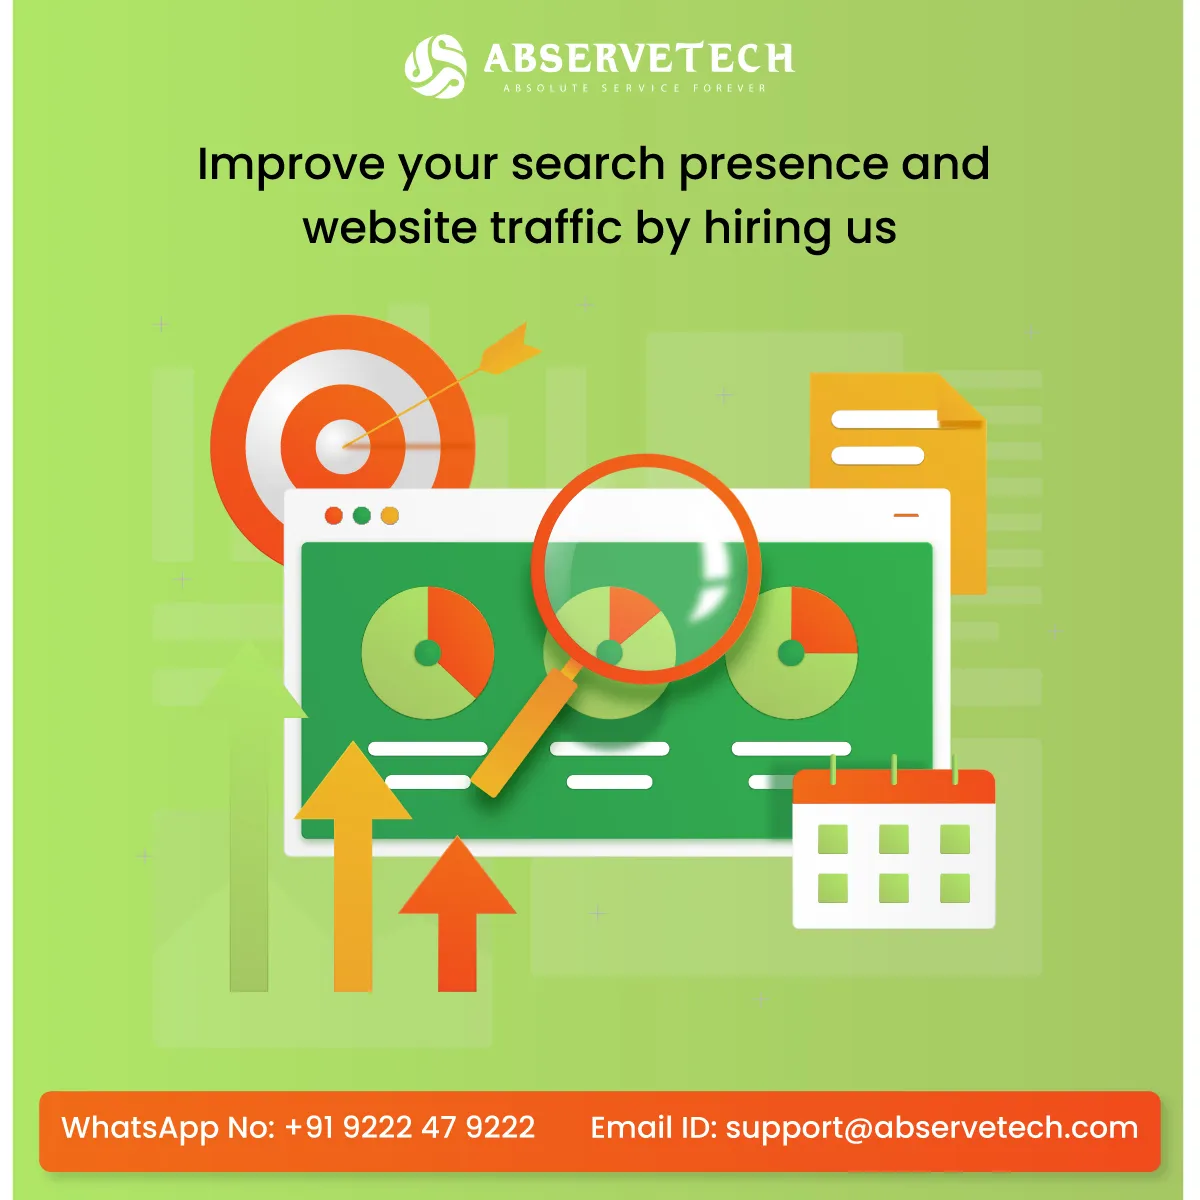 Improve Your Search Presence And Website traffic By Hiring Us